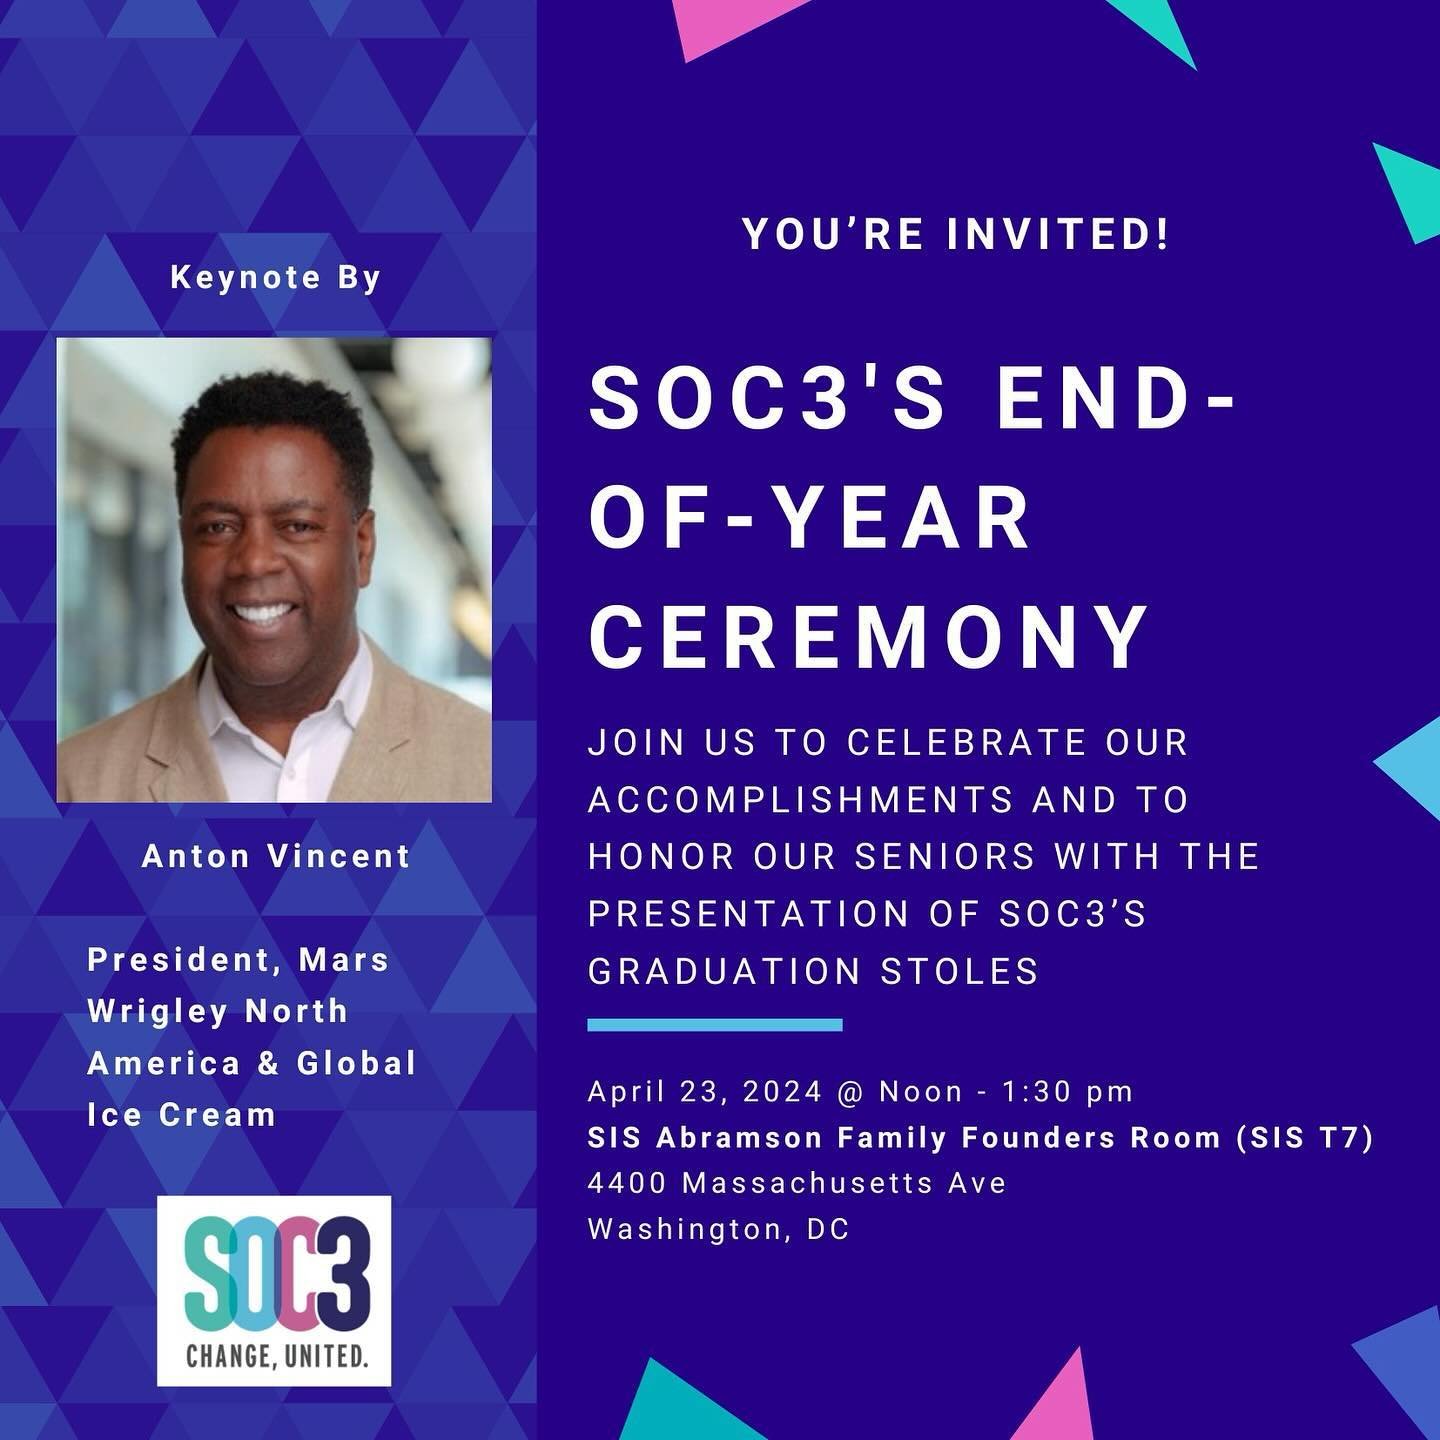 We are thrilled to have Anton Vincent, President, Mars Wrigley North America &amp; Global Ice Cream, give SOC3&rsquo;s End-of-Year Keynote Address. We can&rsquo;t wait to hear his inspiring words and bestow graduation stoles to our SOC3 seniors. If y